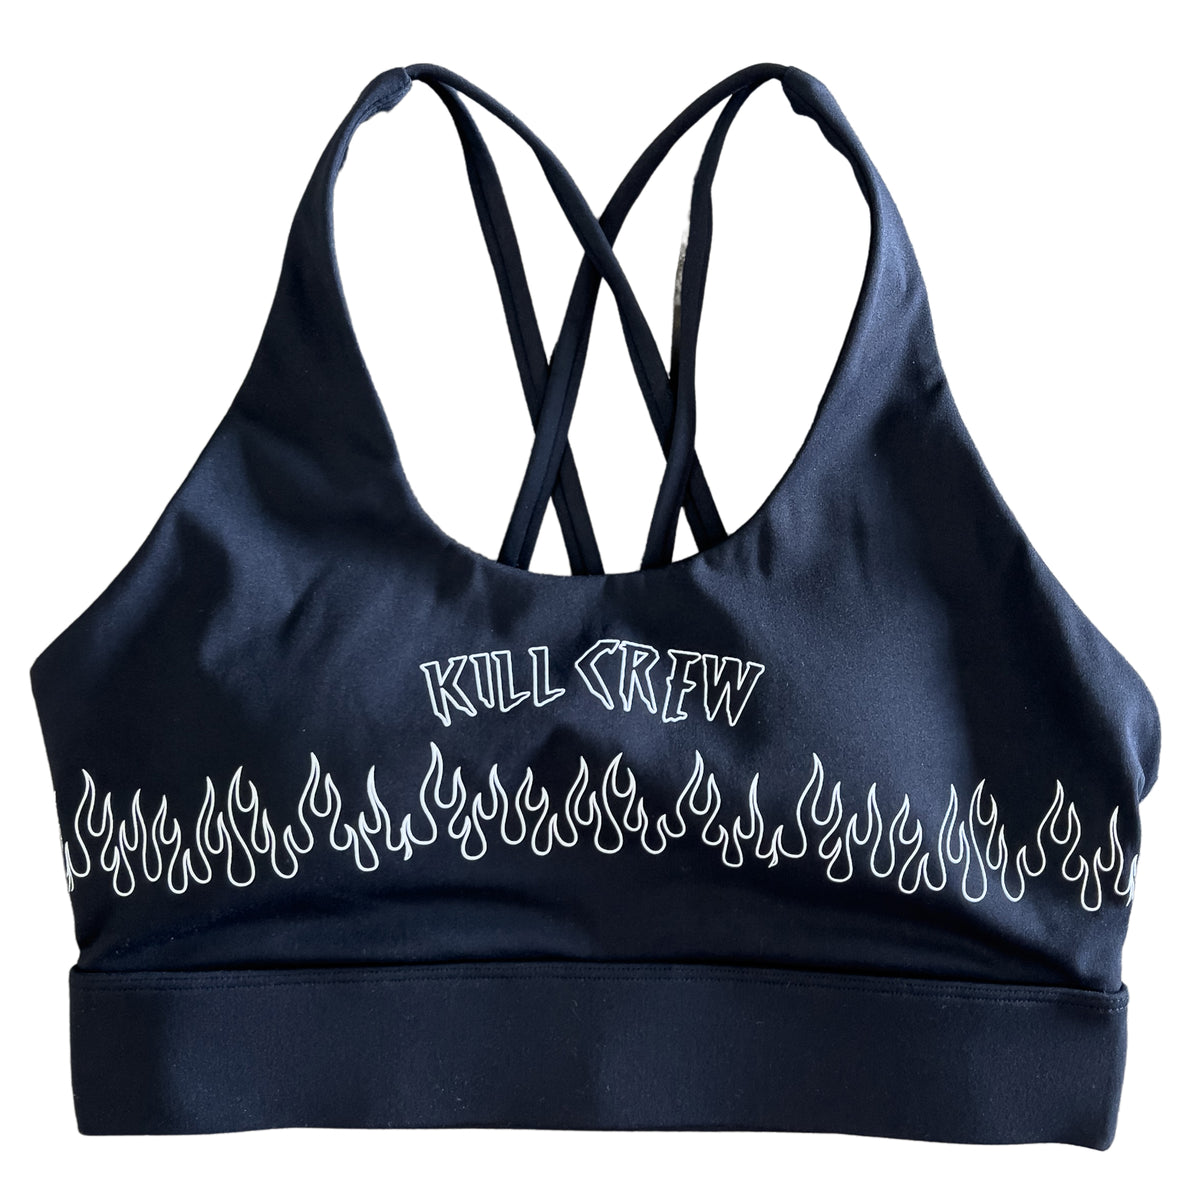 FLAME HIGH SUPPORT SPORTS BRA - BLACK / RED - Kill Crew